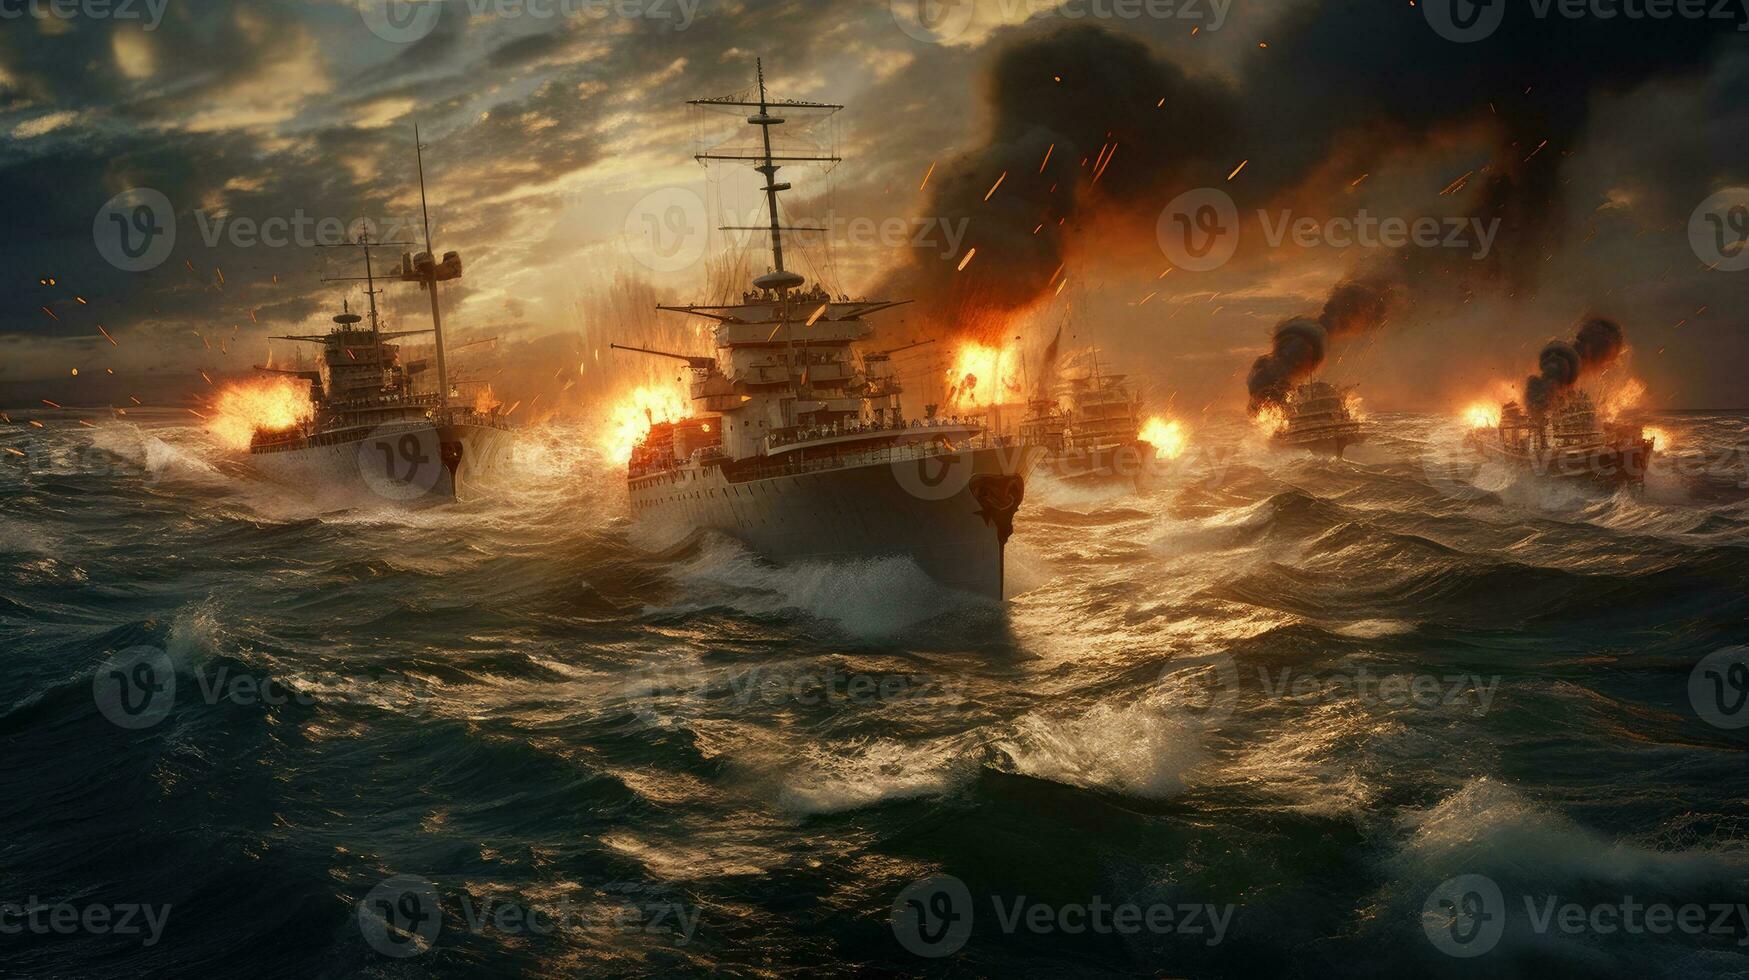 A military image of a naval battle, two warships exchanging fire in the open sea, waves crashing against the hulls, dark clouds on the horizon, highlighting the chaos and destruction photo